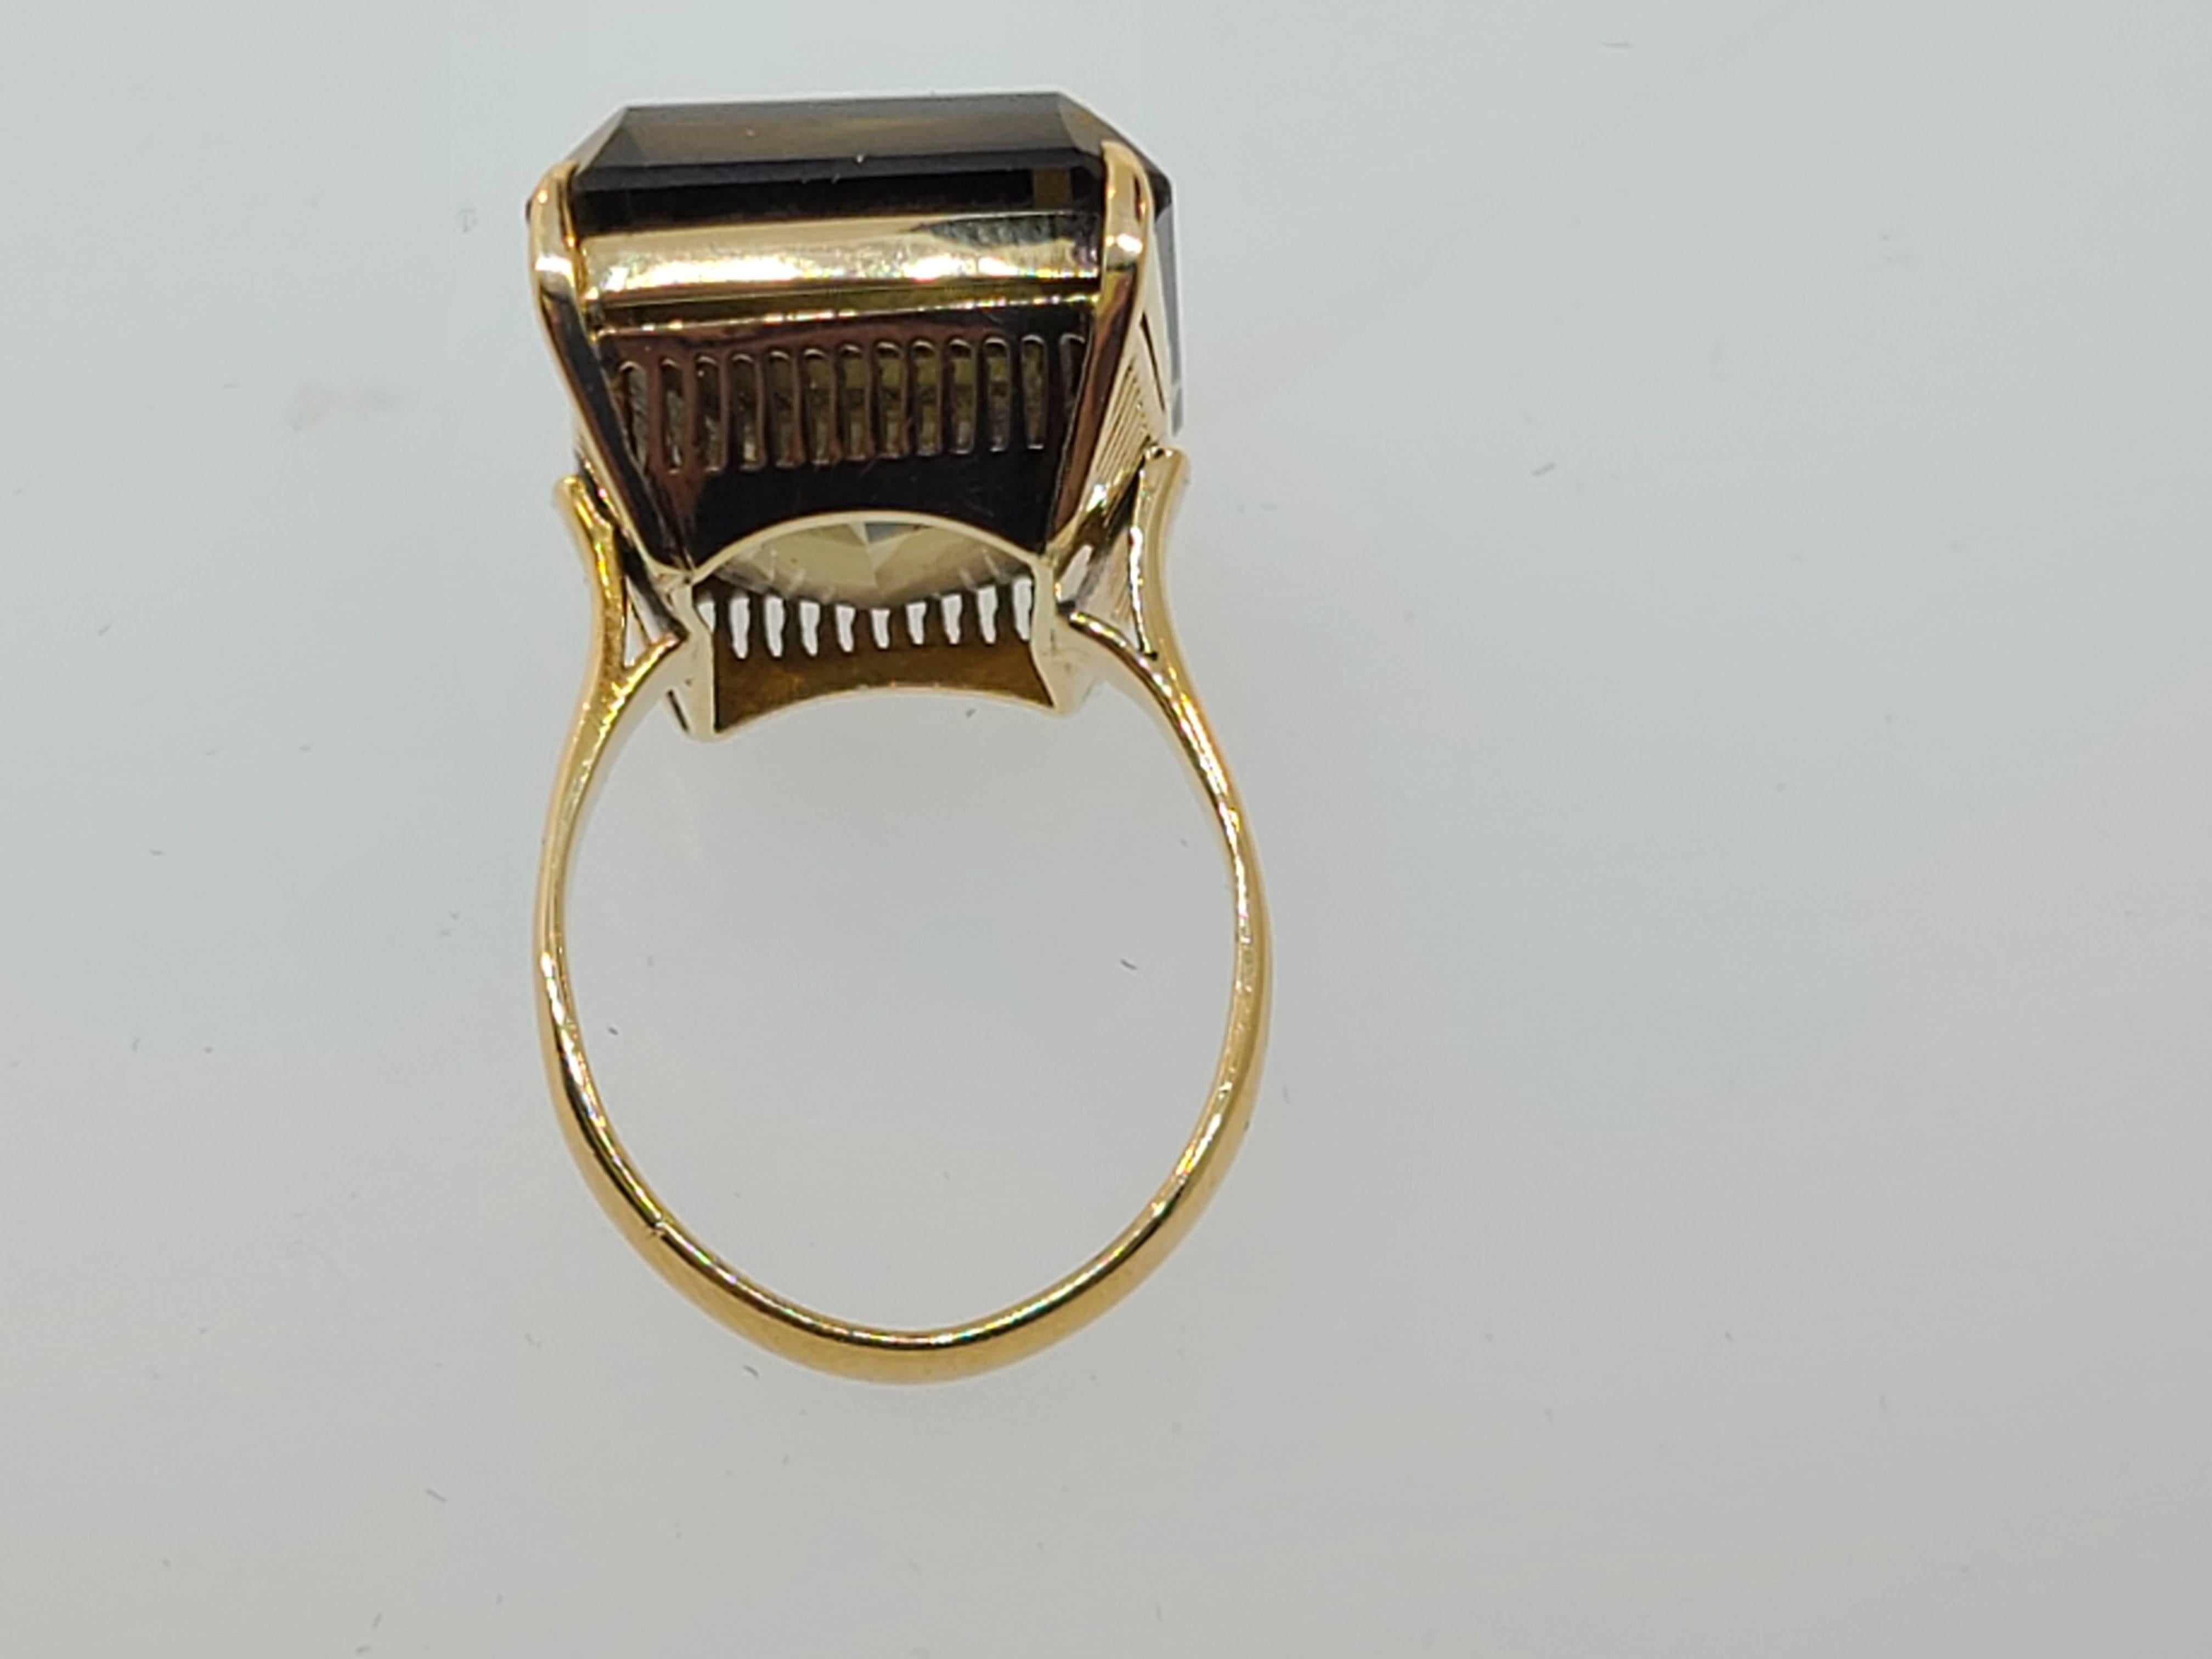 This vintage 1970's custom made 18k yellow gold ring is finely crafted in a bright polished finish featuring attention to craftsmanship and design with an ode to vintage elegance.  The large 20mmx15mm emerald cut natural citrine solitaire stones is